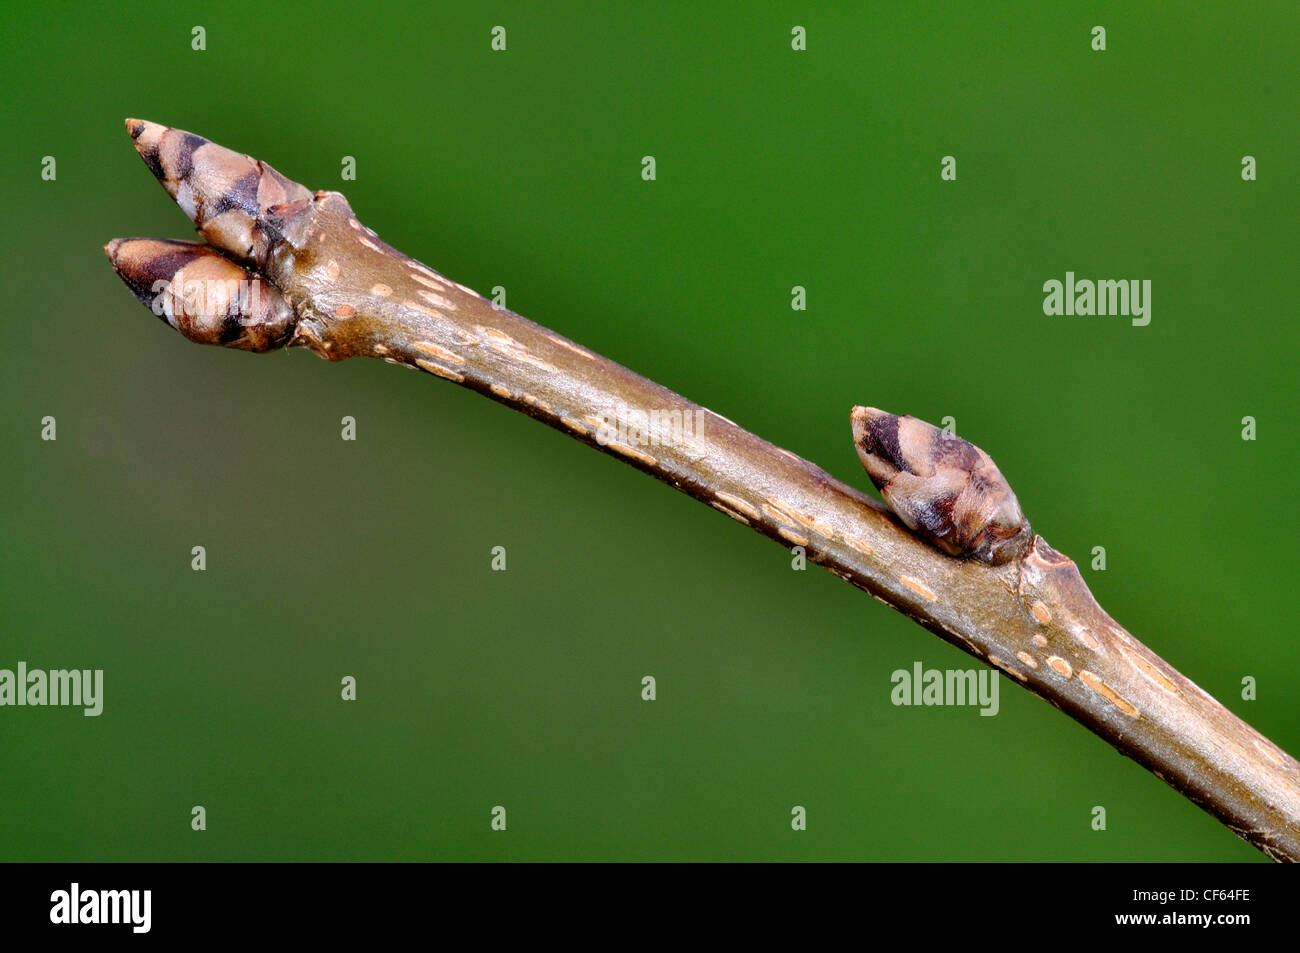 Bird cherry twig showing swelling buds in mid-winter. Dorset, UK January 2012 Stock Photo